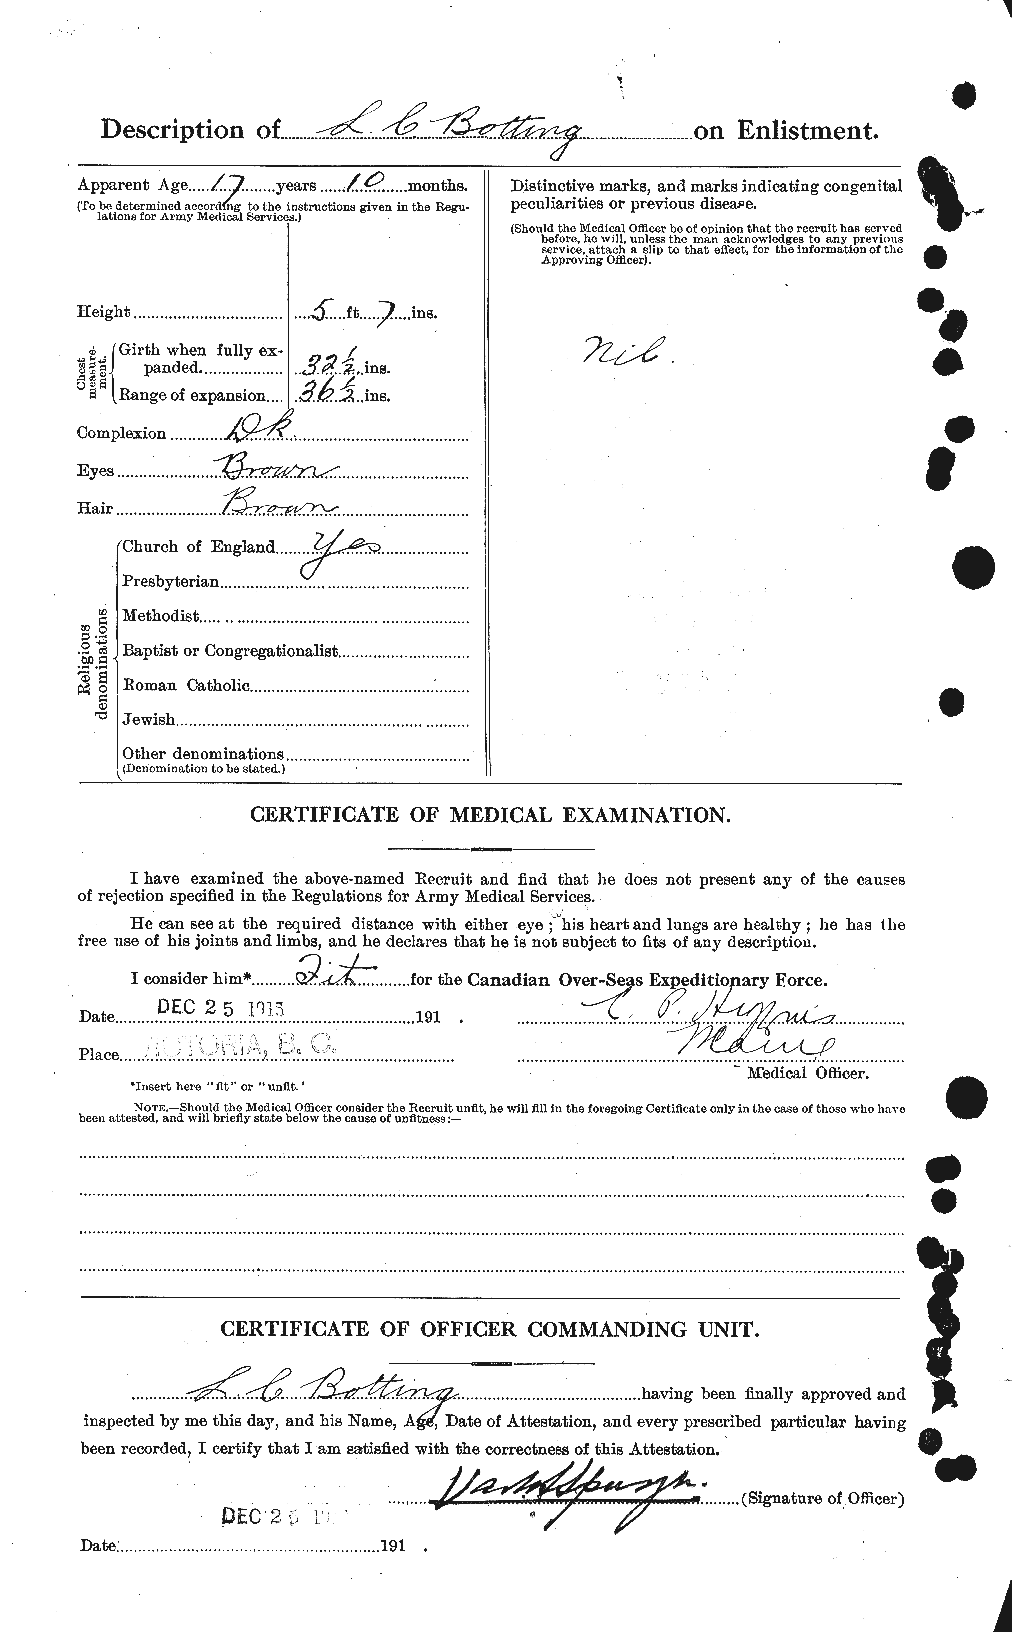 Personnel Records of the First World War - CEF 252098b